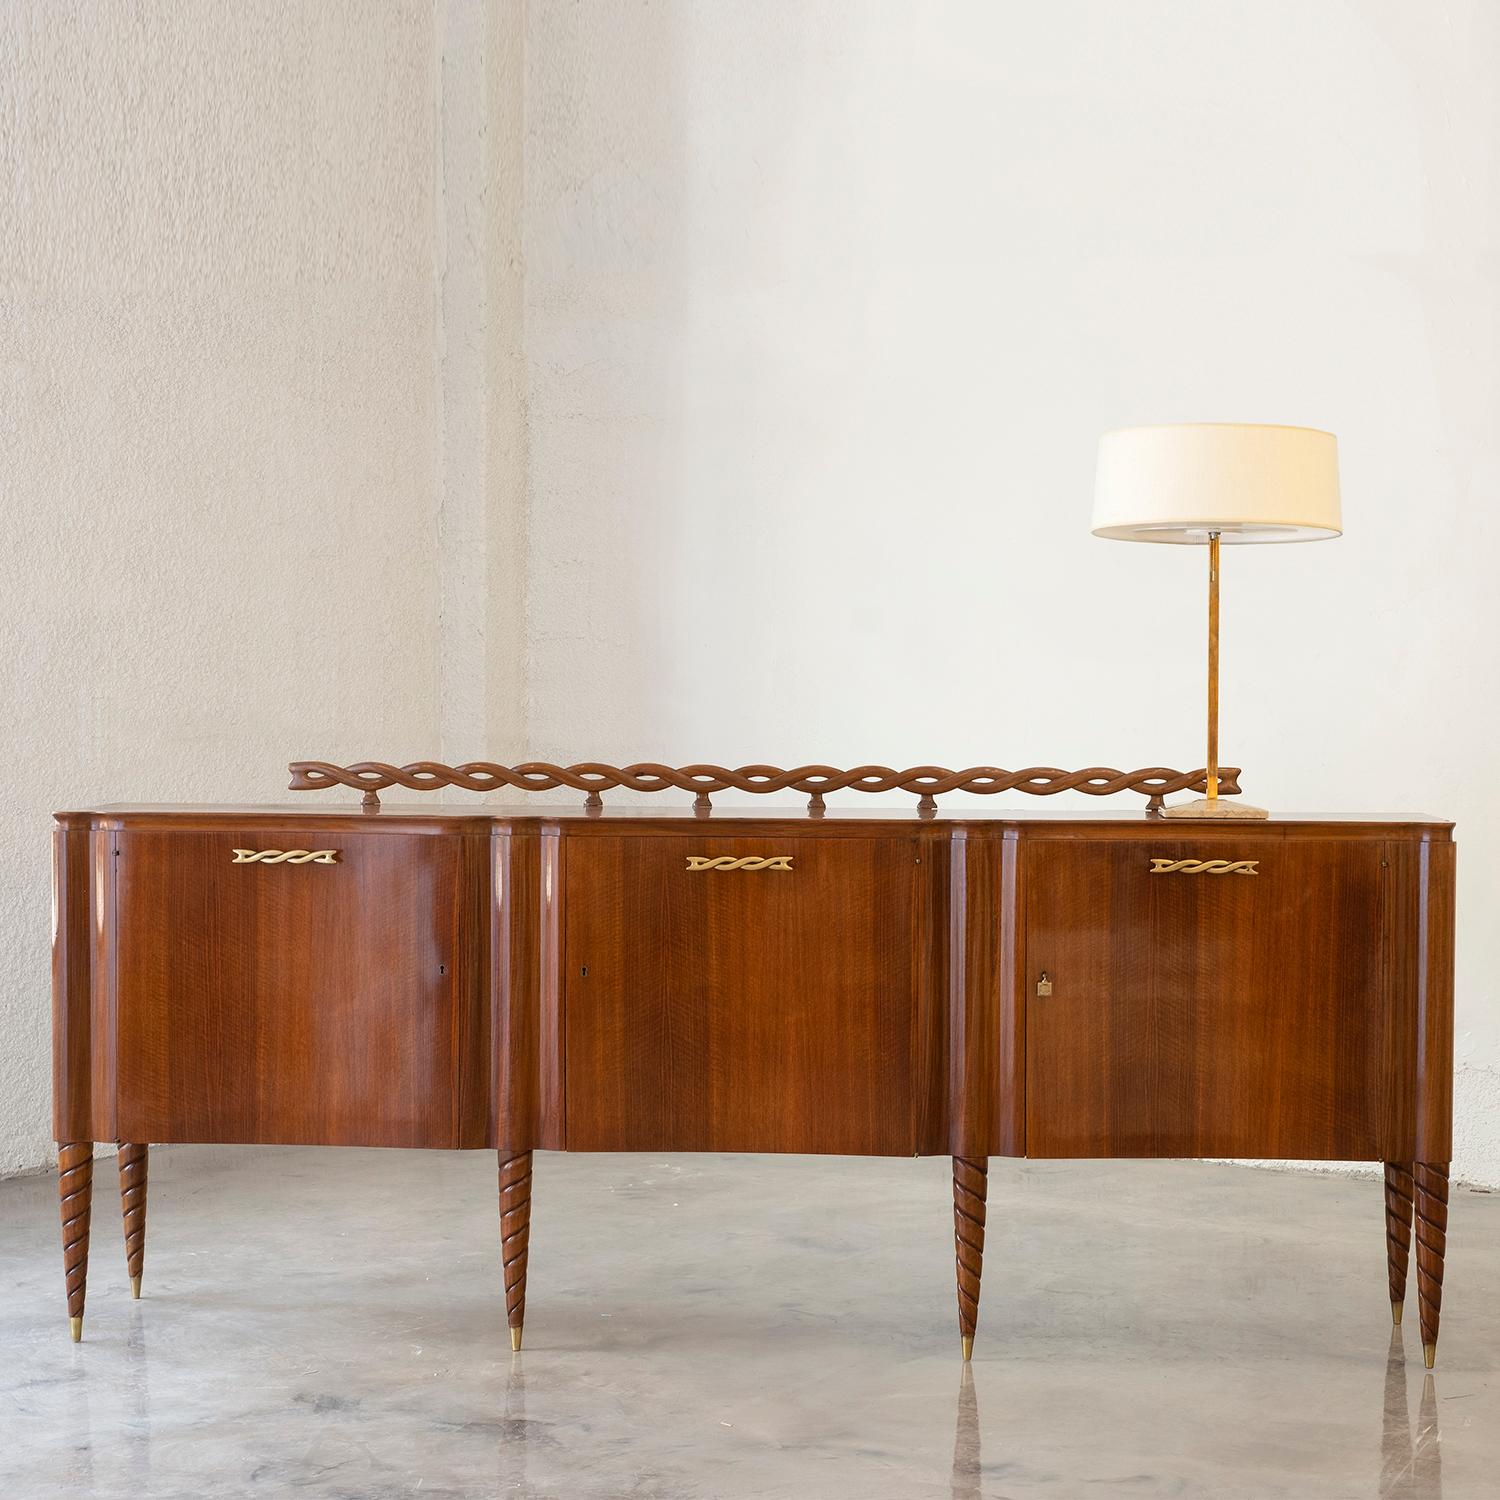 A light-brown, vintage Mid-Century Modern Italian credenza, sideboard made of hand crafted polished walnut with three doors and detailed brass handles, designed by Paolo Buffa and produced by Mario Quarti in good condition. The large cabinet is